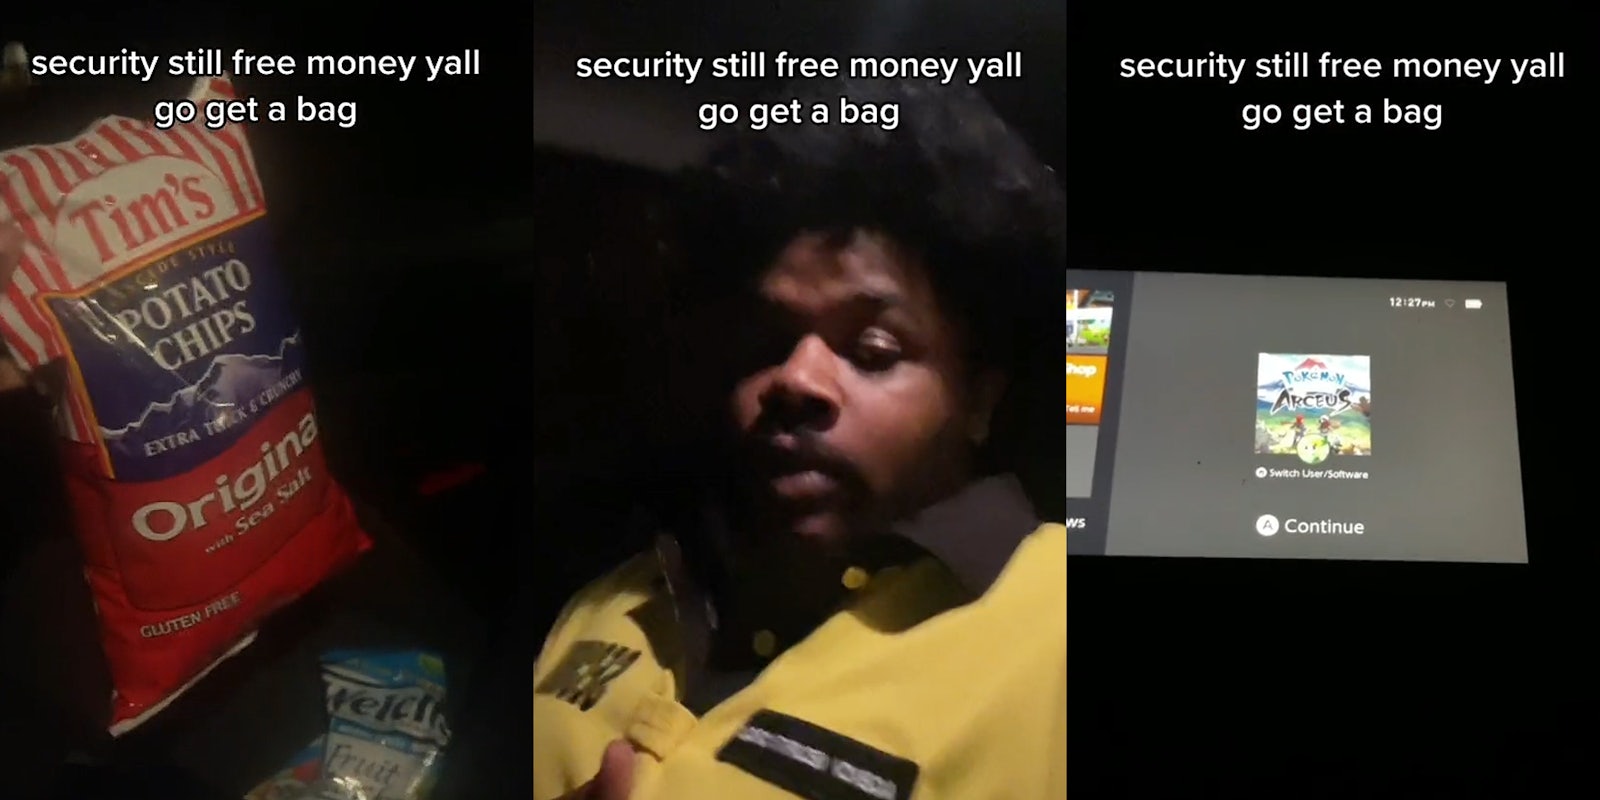 man in car holding chips and fruit snacks caption 'security still free money yall go get a bag' (l) Man speaking in car caption 'security still free money yall go get a bag'(c) man playing Nintendo Switch in car caption 'security still free money yall go get a bag'(r)